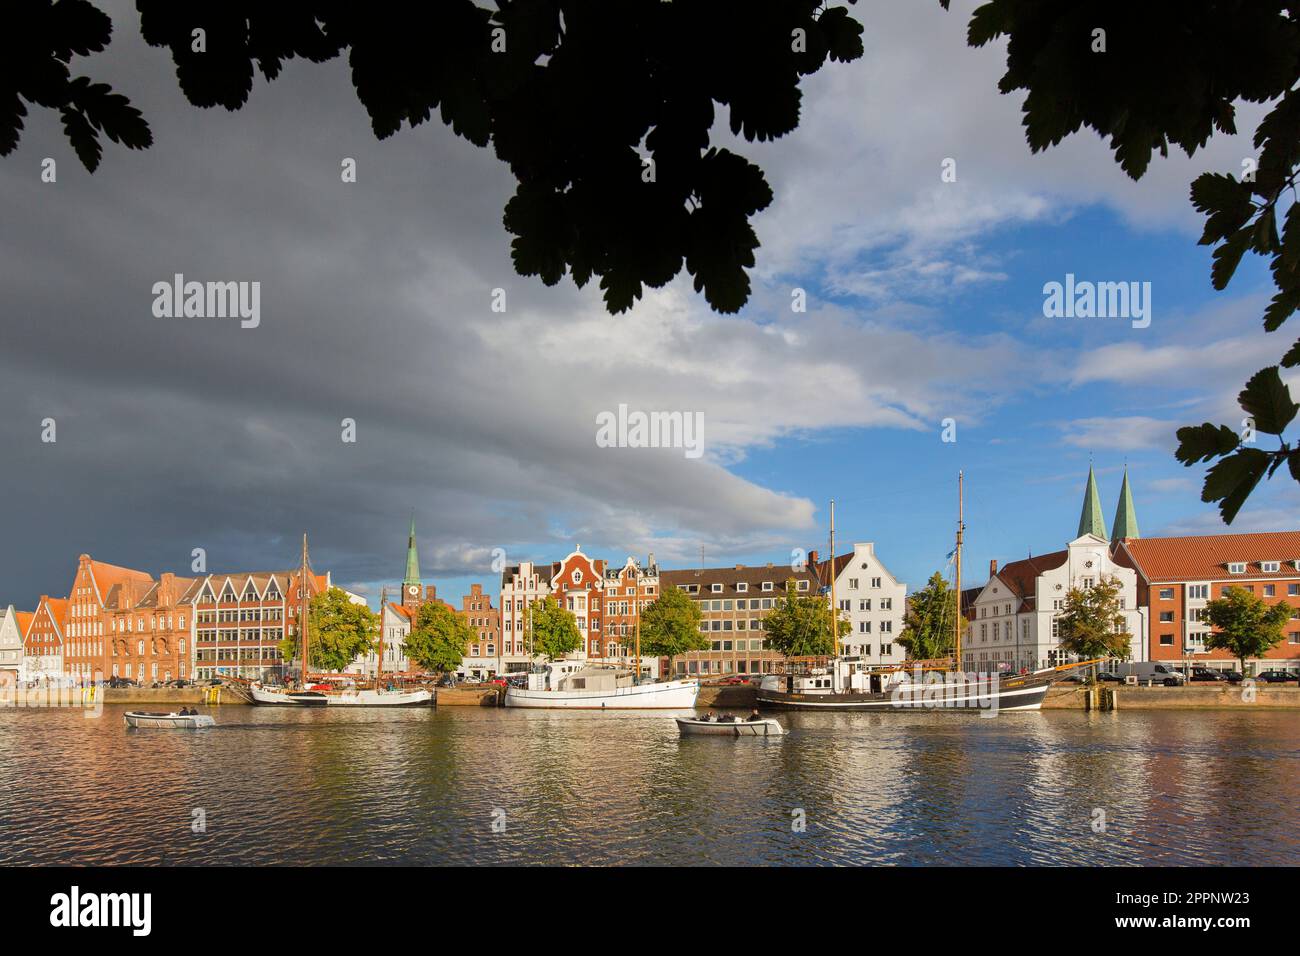 Museum harbour / Museumshafen Lübeck and traditional sailing ships berthed at the Untertrave in the Hanseatic town Lübeck, Schleswig-Holstein, Germany Stock Photo